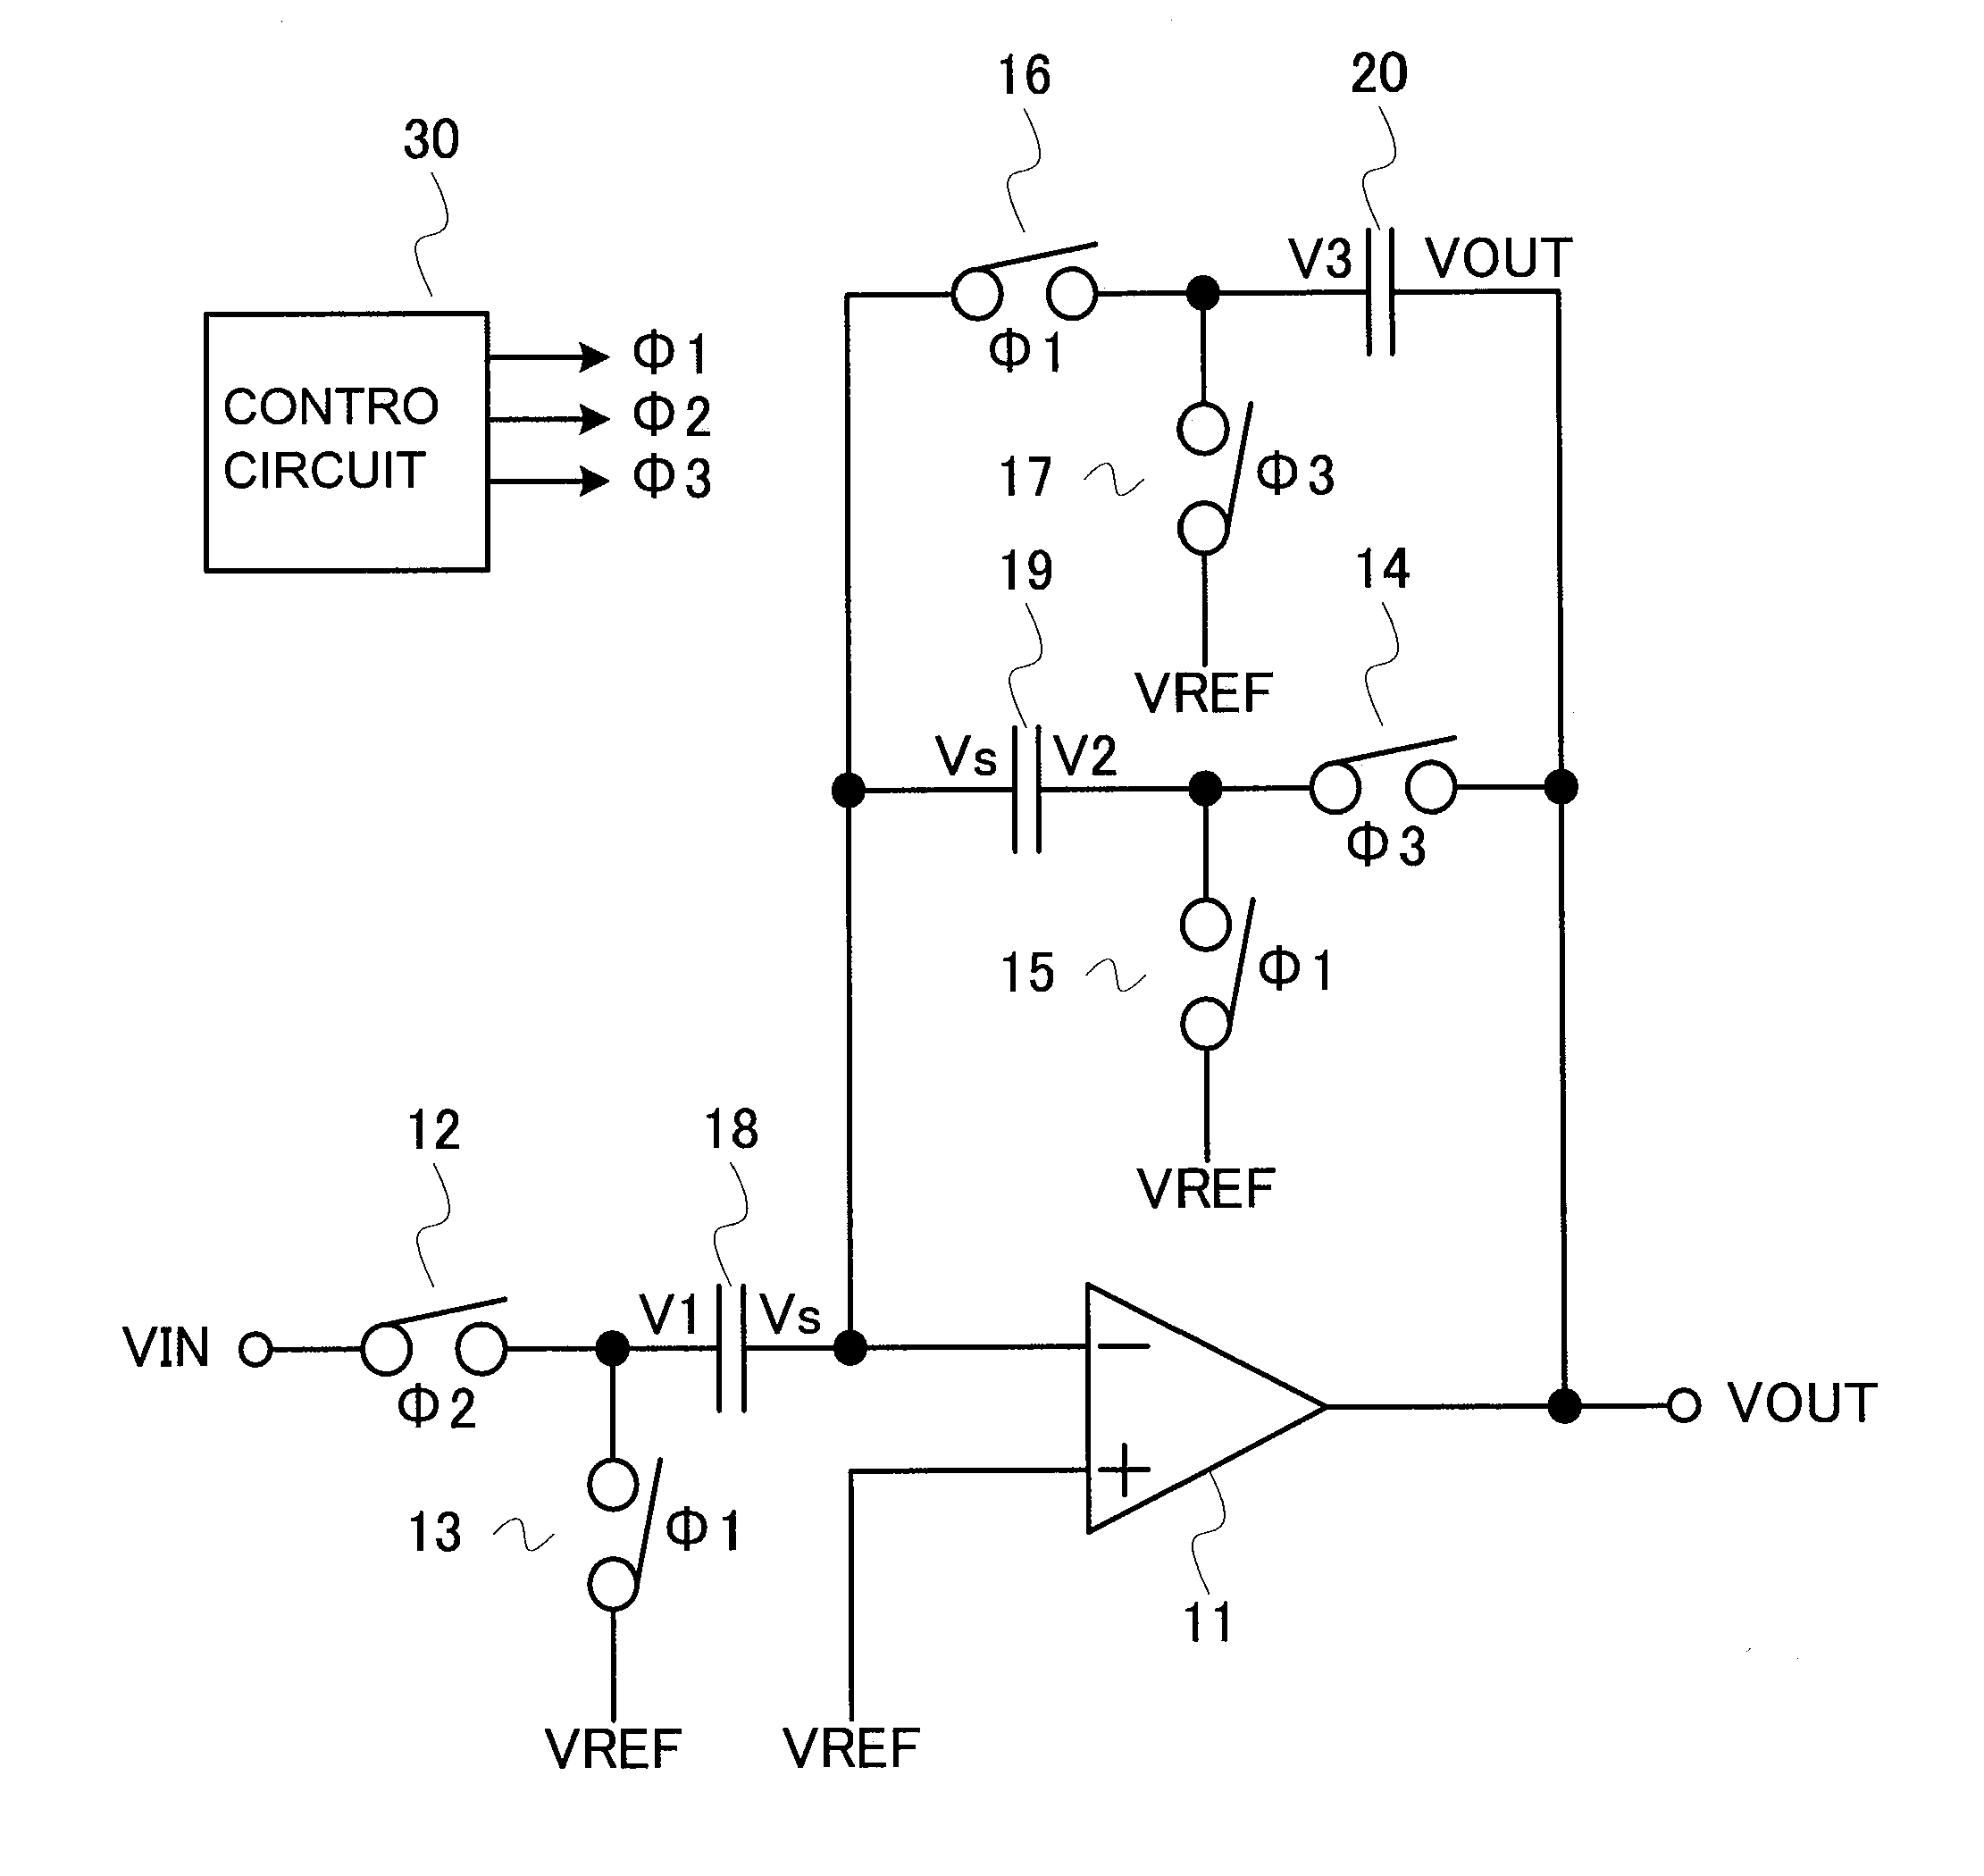 Switched capacitor amplifier